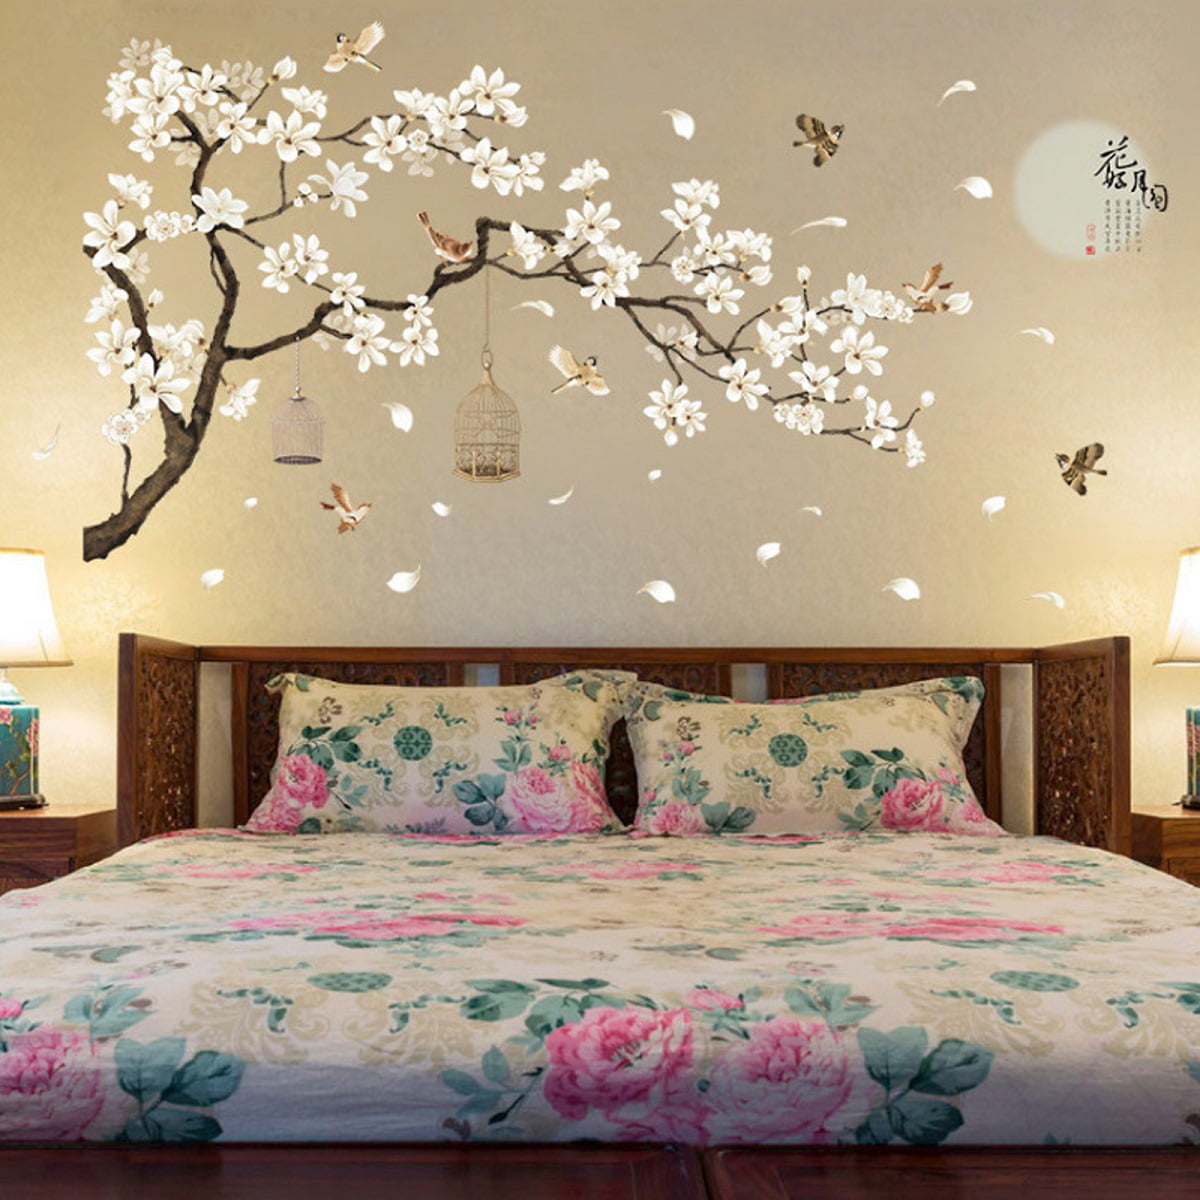 Cherry Blossom flower Wall Stickers living room bedroom Wall decals 